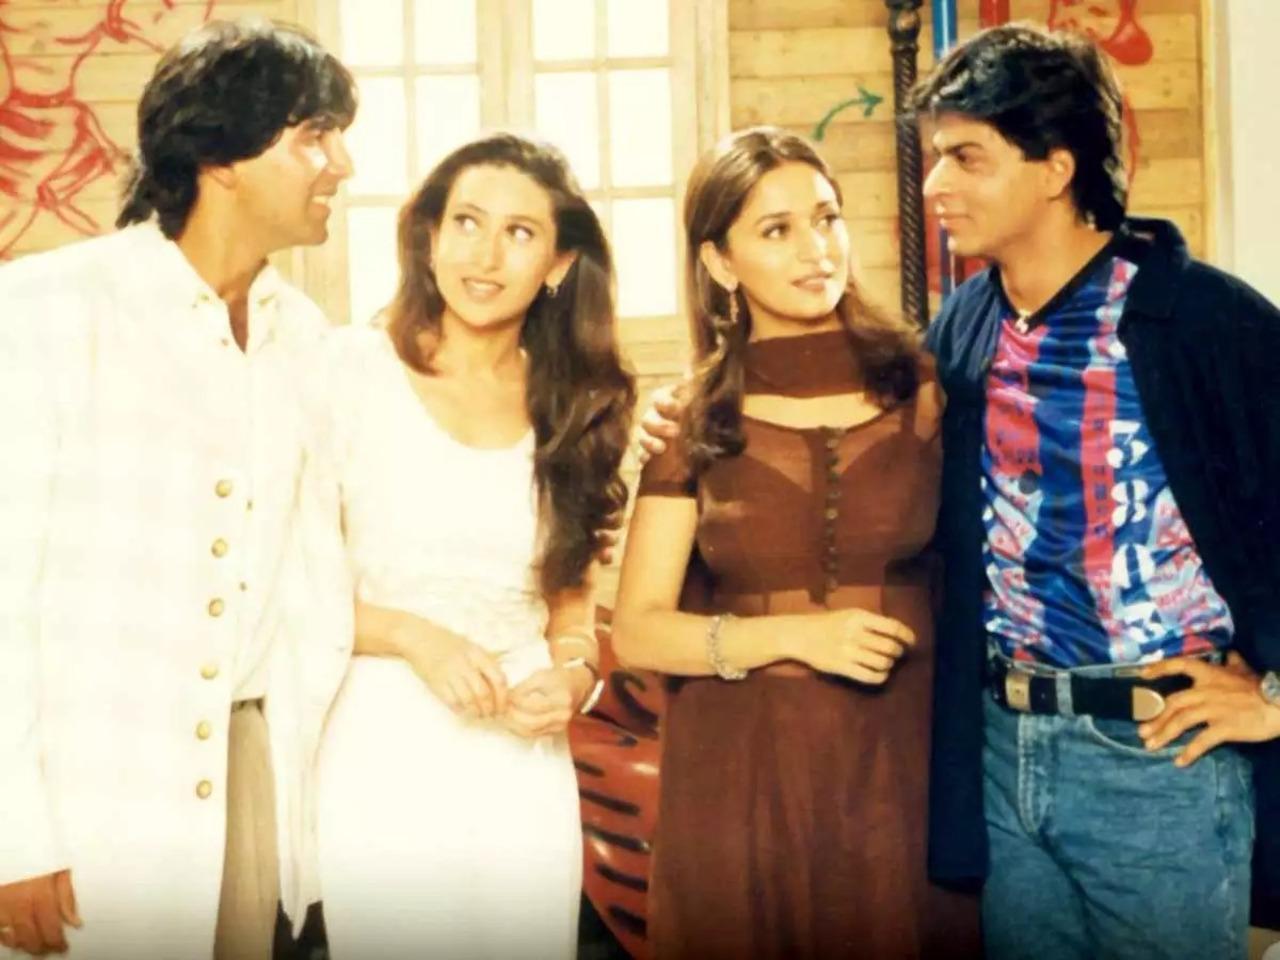 Dil To Pagal Hai (1997)
Rahul (Shah Rukh Khan) runs a dance troupe of which Nisha (Karisma Kapoor) is a part. While Nisha secretly is in love with him, he falls for Pooja (Madhuri Dixit). While it's a romantic tale, the film beautifully portrays the friendship between Nisha and Rahul, and Pooja and Ajay (Akshay Kumar)